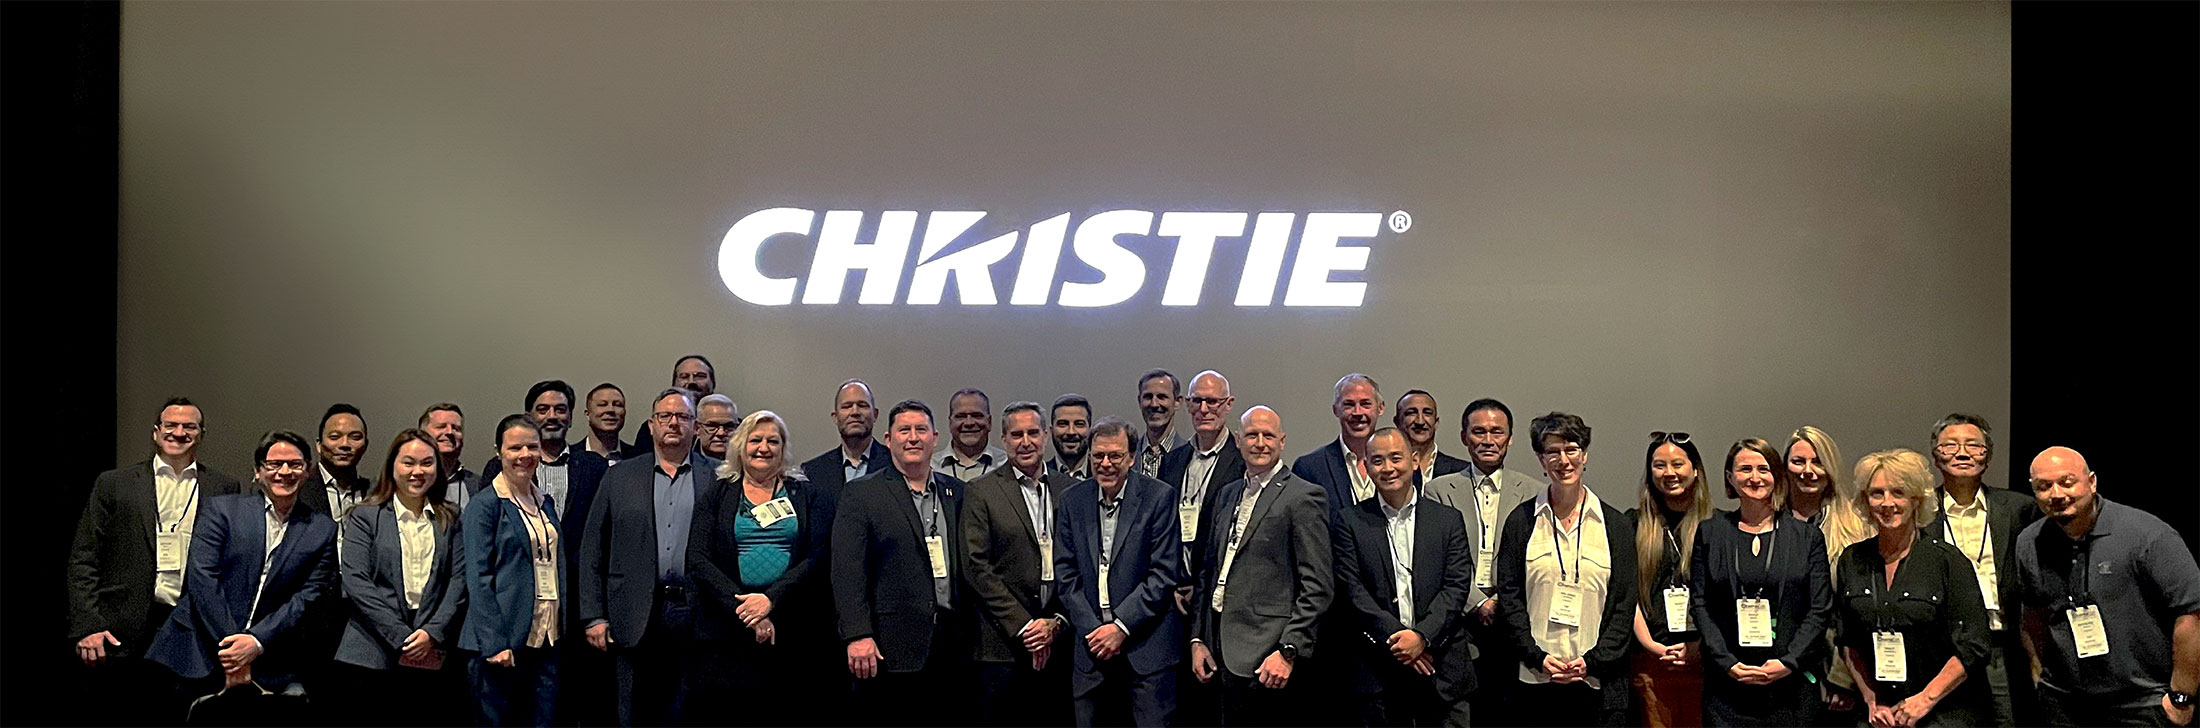 A group photo of the Christie Cinema team standing in front of a movie screen displaying the Christie logo